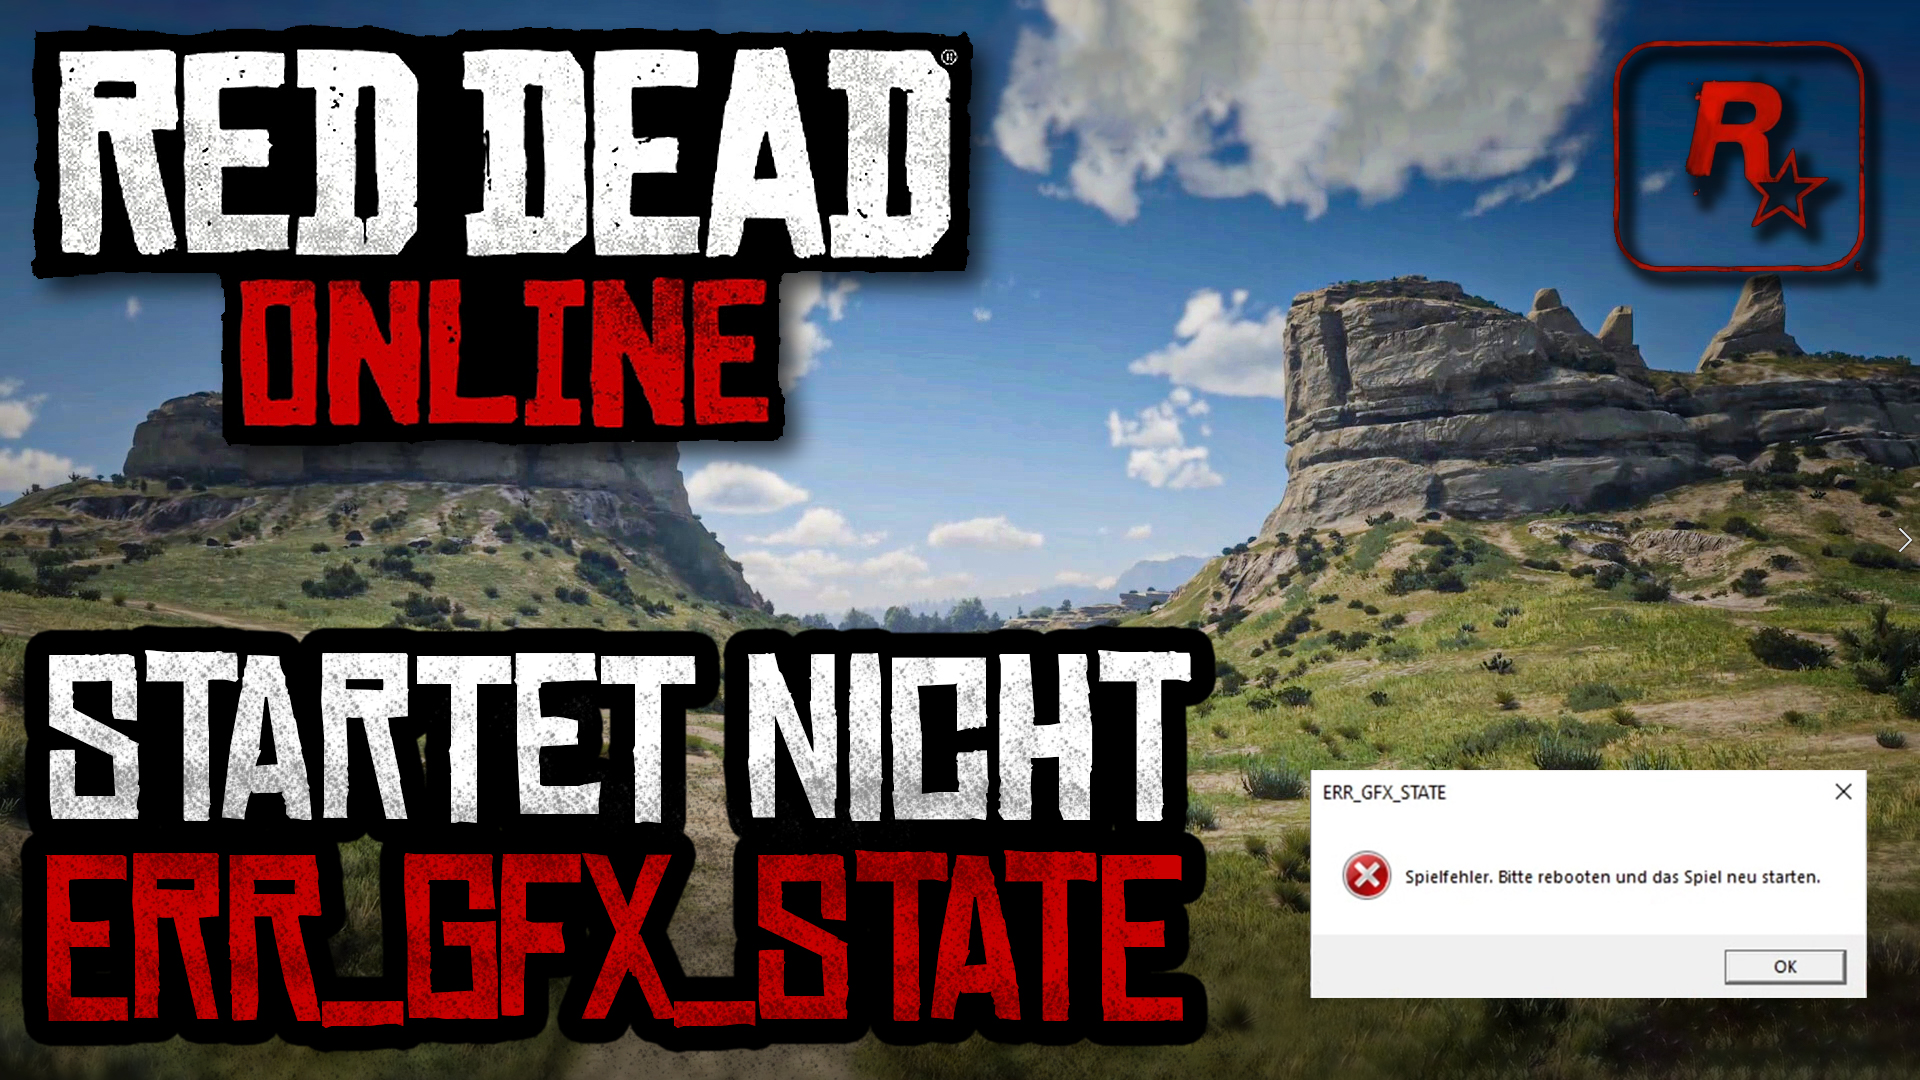 How to fix ERR GFX STATE in Red Dead Redemption 2 